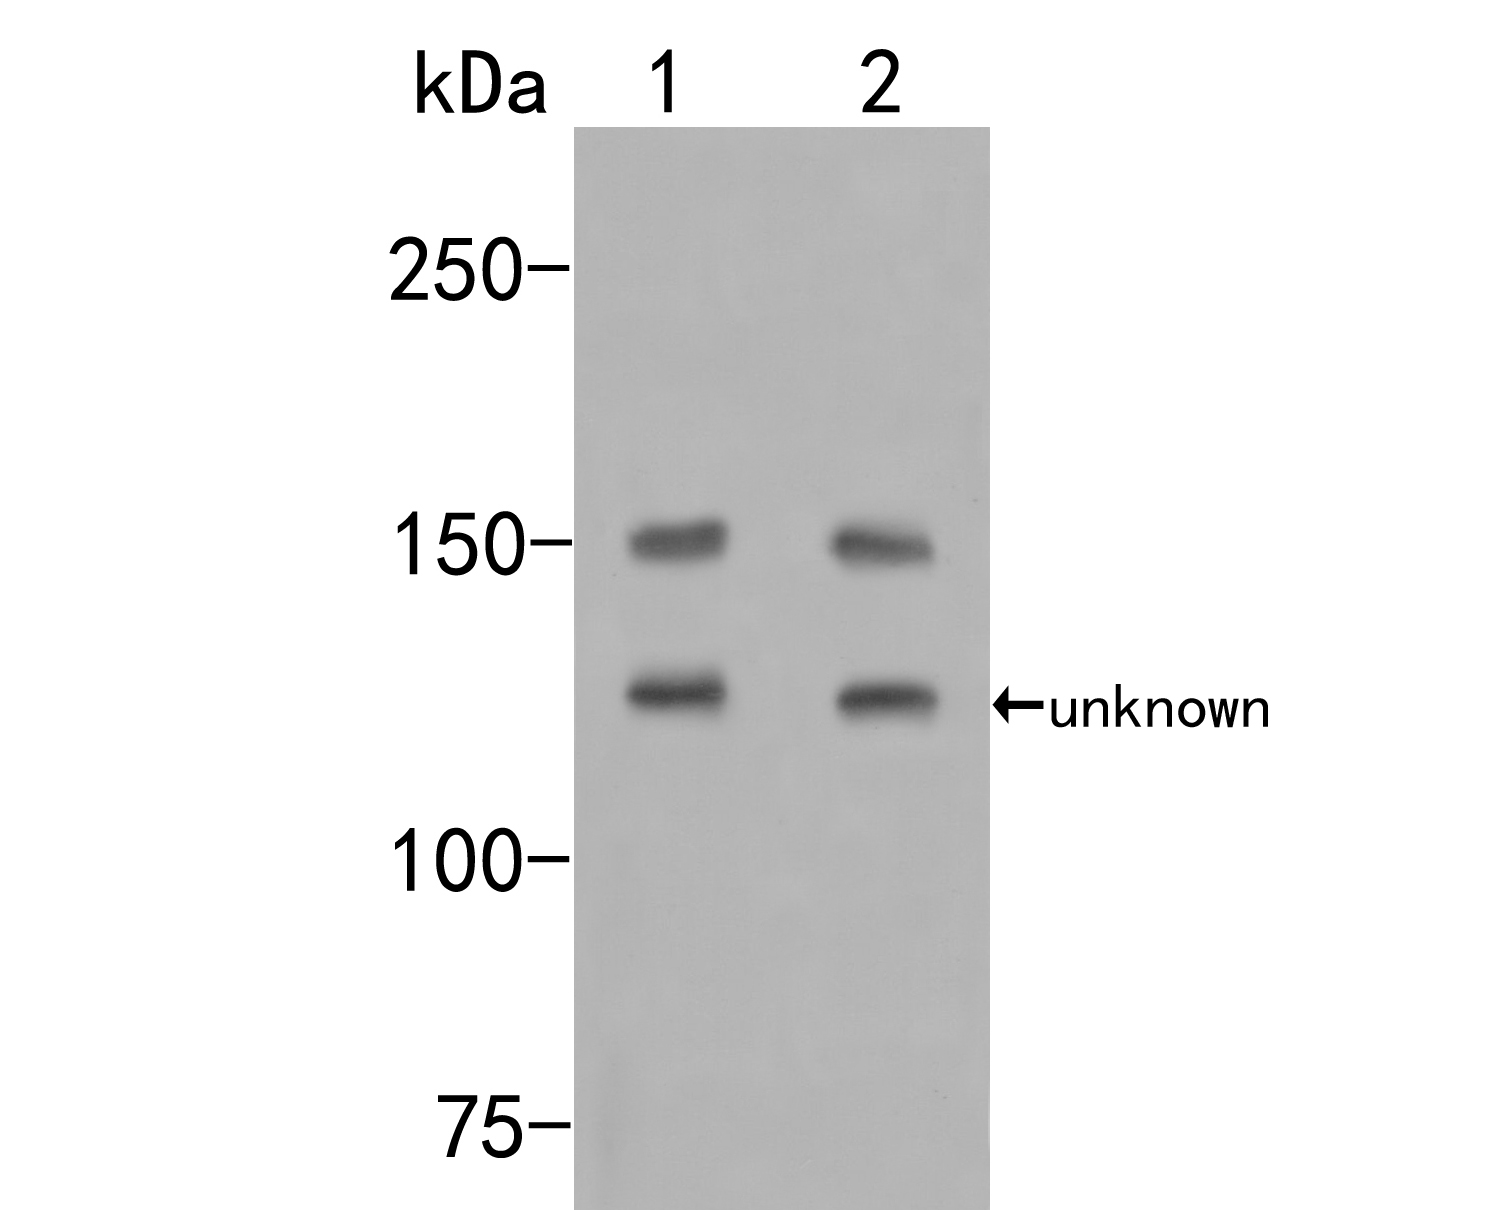 Western blot analysis of Flightless 1 on different lysates. Proteins were transferred to a PVDF membrane and blocked with 5% NFDM/TBST for 1 hour at room temperature. The primary antibody (HA500167, 1/500) was used in 5% NFDM/TBST at room temperature for 2 hours. Goat Anti-Rabbit IgG - HRP Secondary Antibody (HA1001) at 1:200,000 dilution was used for 1 hour at room temperature.<br />
Positive control: <br />
Lane 1: Mouse lung tissue lysate<br />
Lane 2: MCF-7 cell lysate